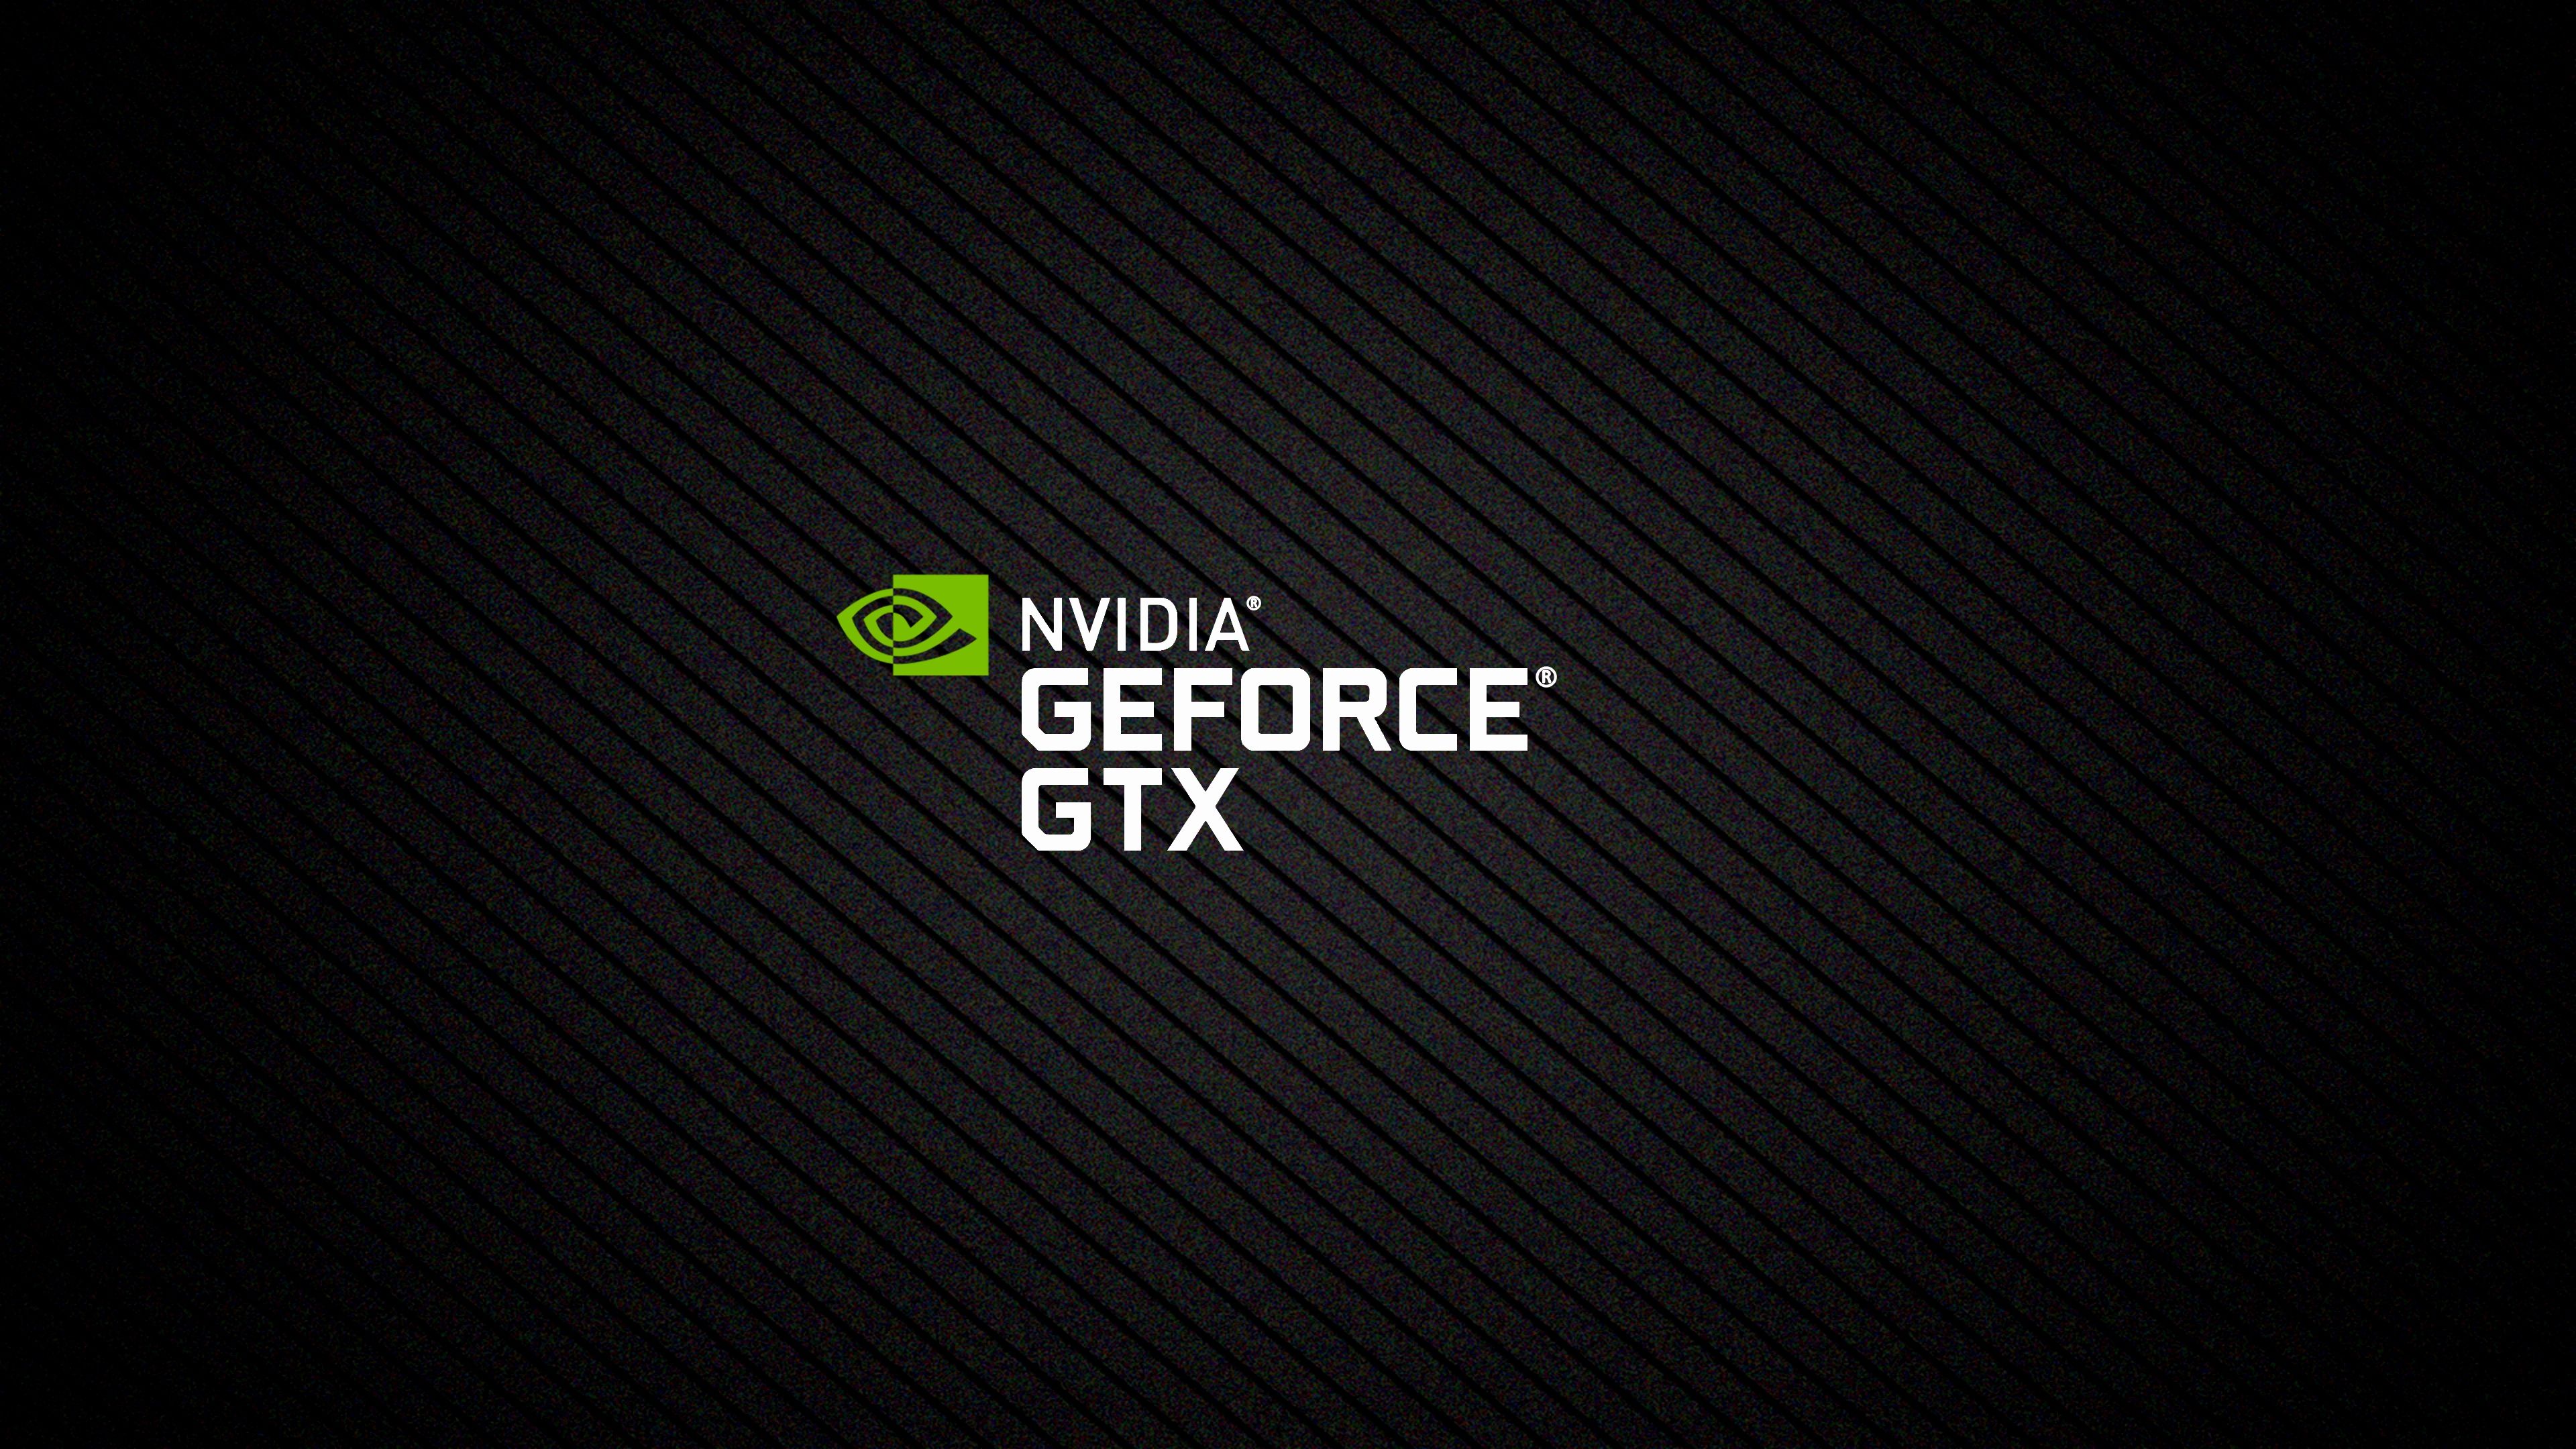 Geforce Wallpaper Best Of Nvidia Geforce Gtx Gaming Puter Wallpaper This Month of The Hudson